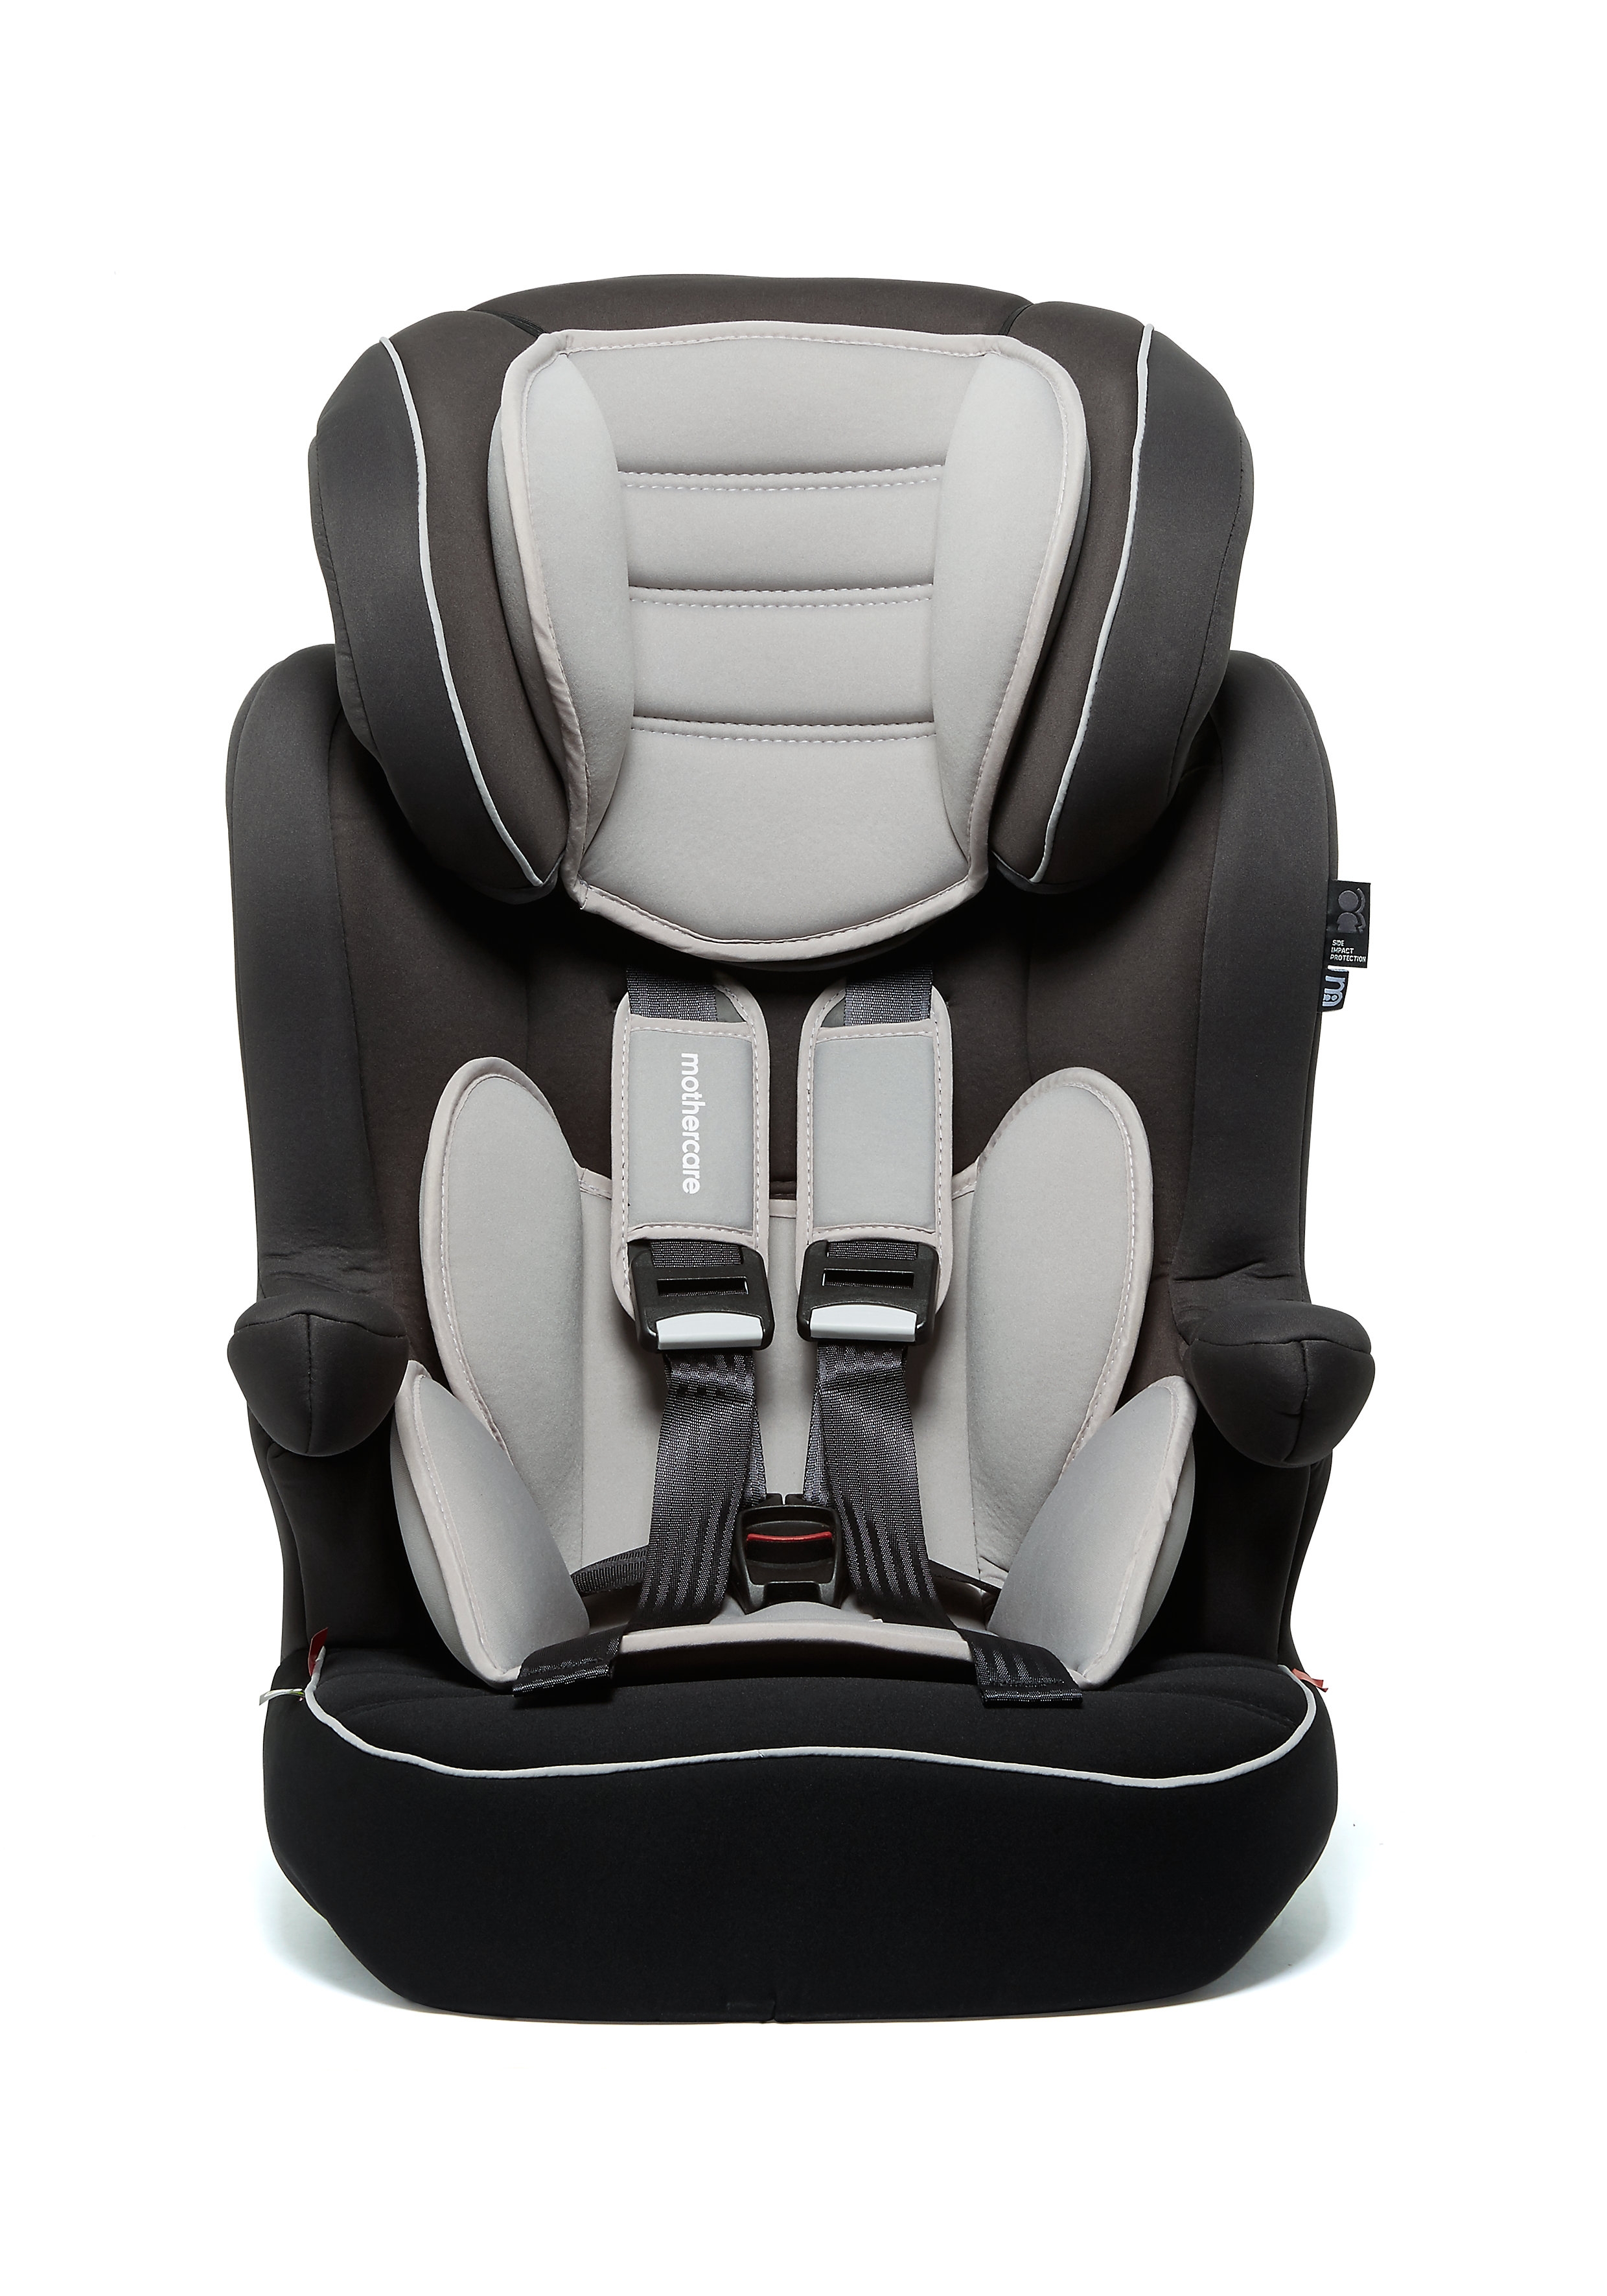 Mothercare | Mothercare Advance Xp Highback Booster Car Seat - Black